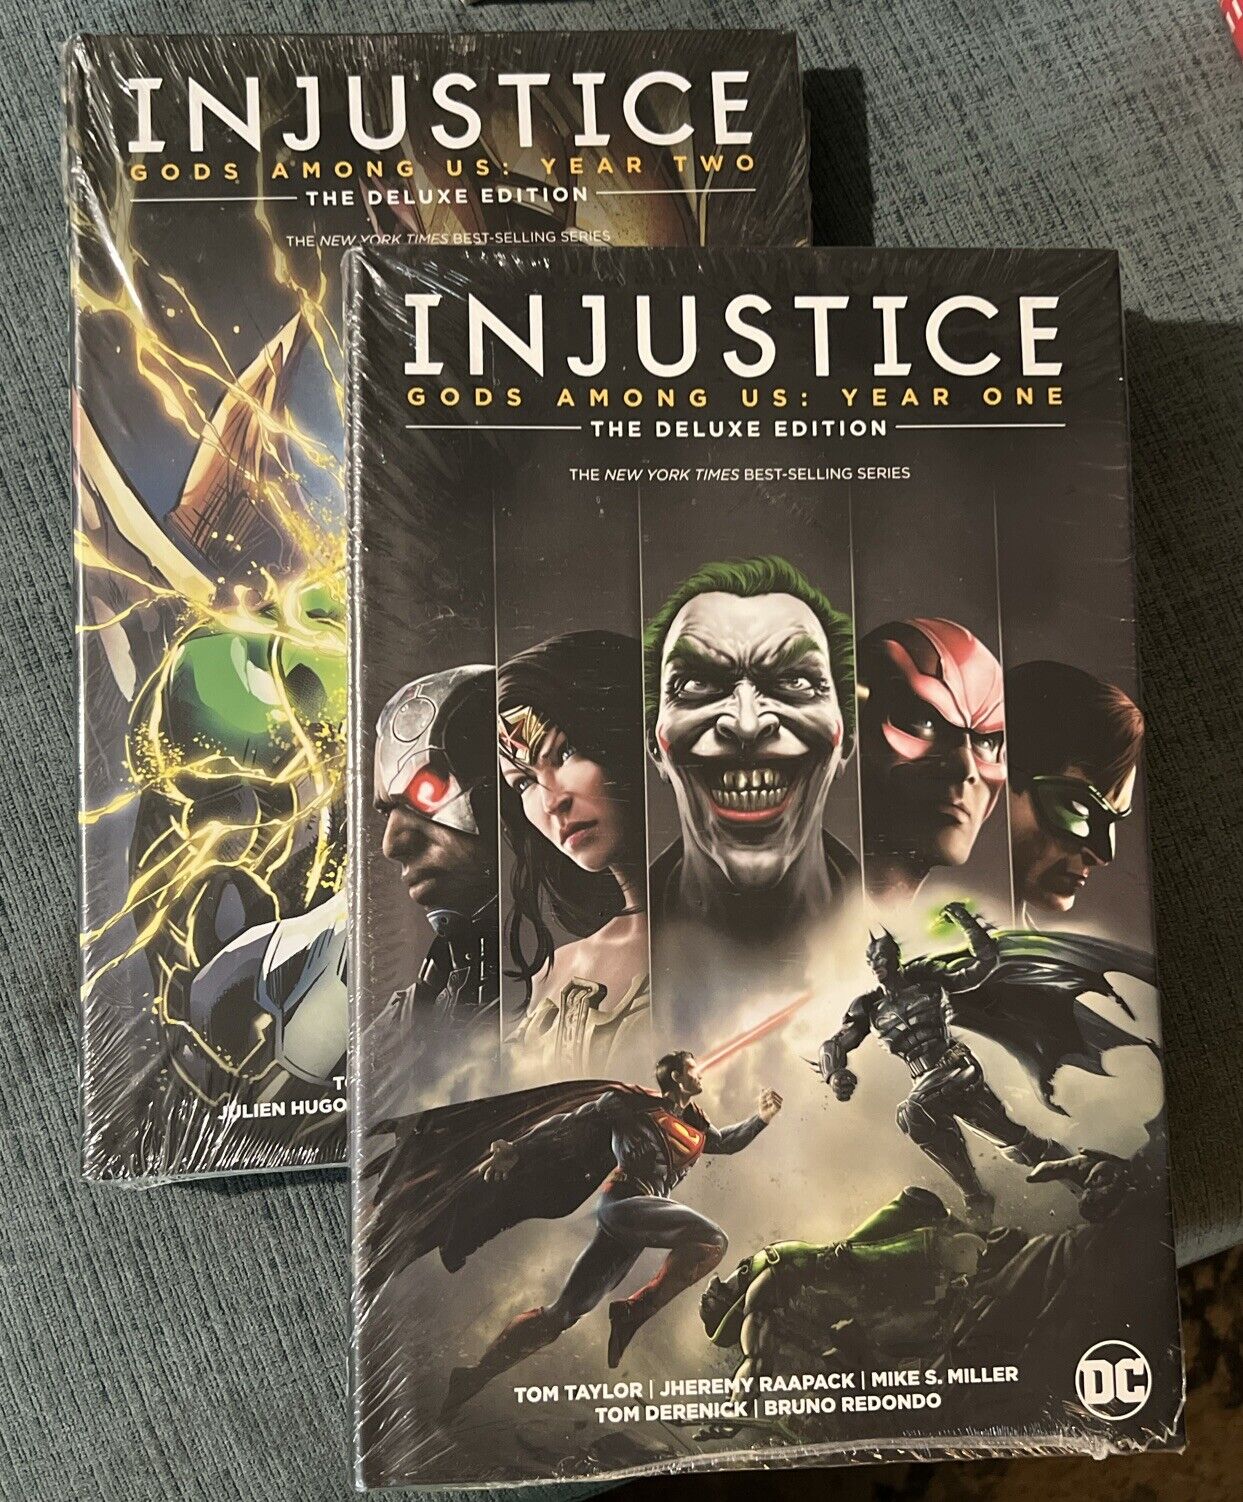 Injustice The Deluxe Edition - GODS AMONG US: YEAR ONE & TWO - HC - New Sealed